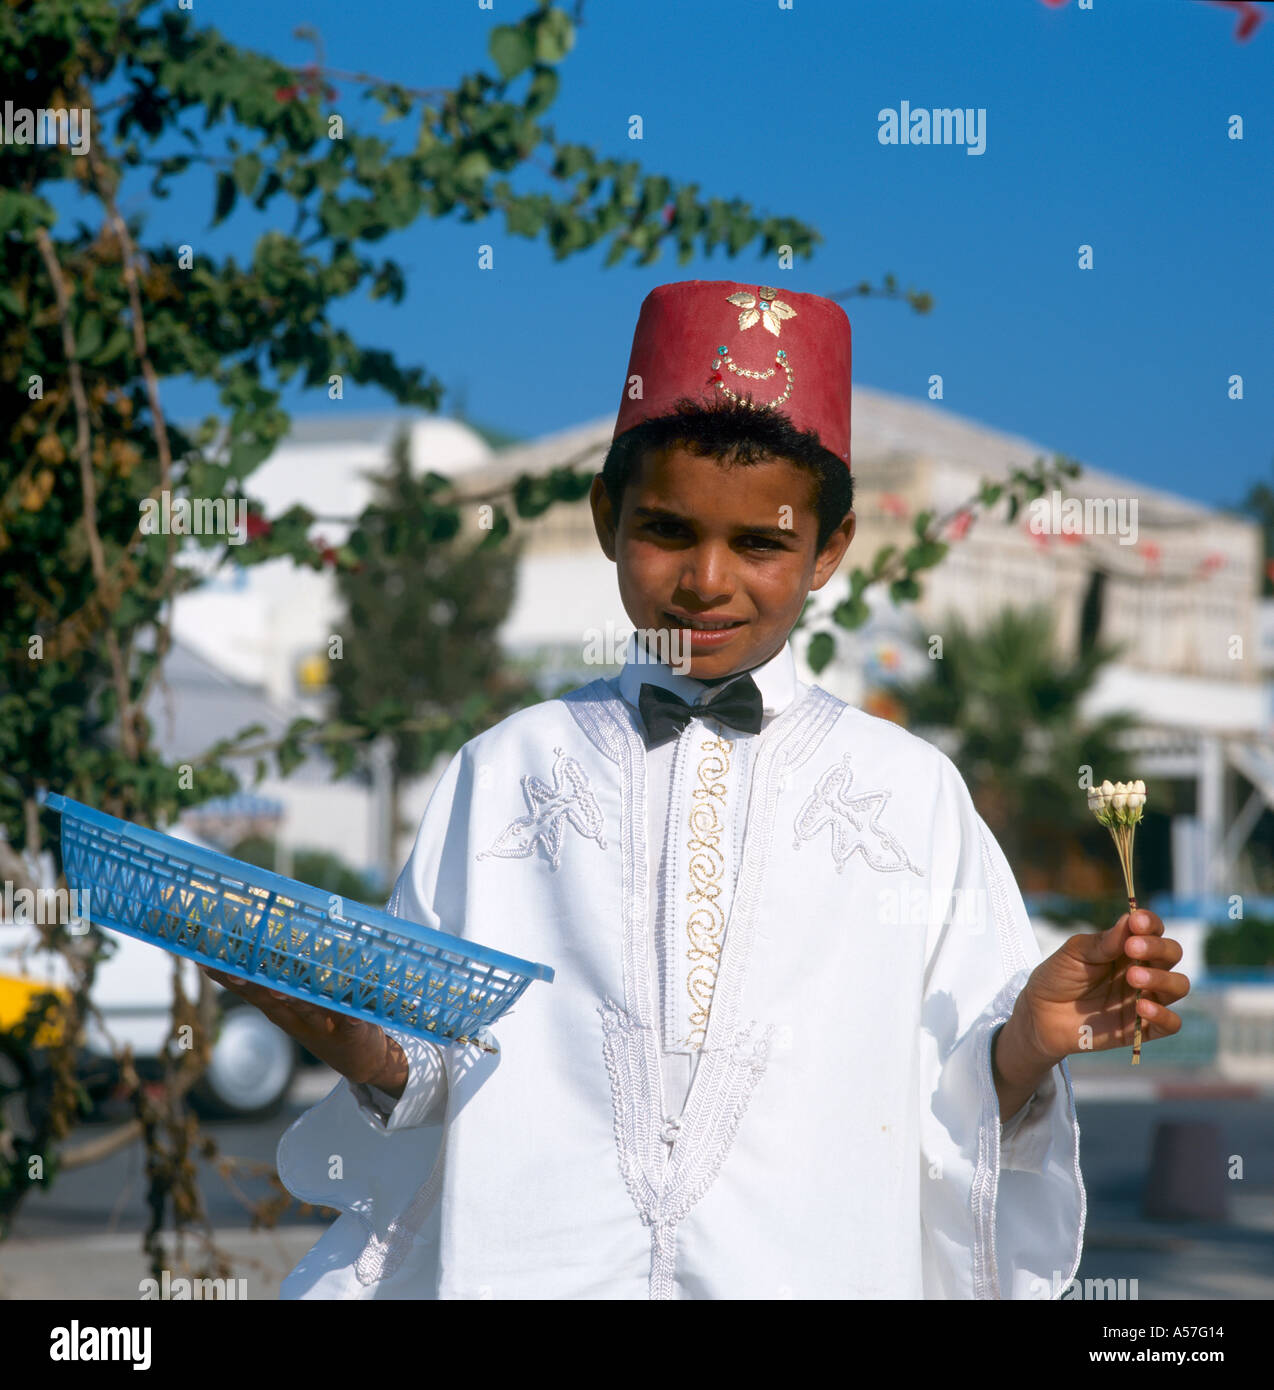 Young boy selling flowers, Hammamet, Tunisia, North Africa Stock Photo